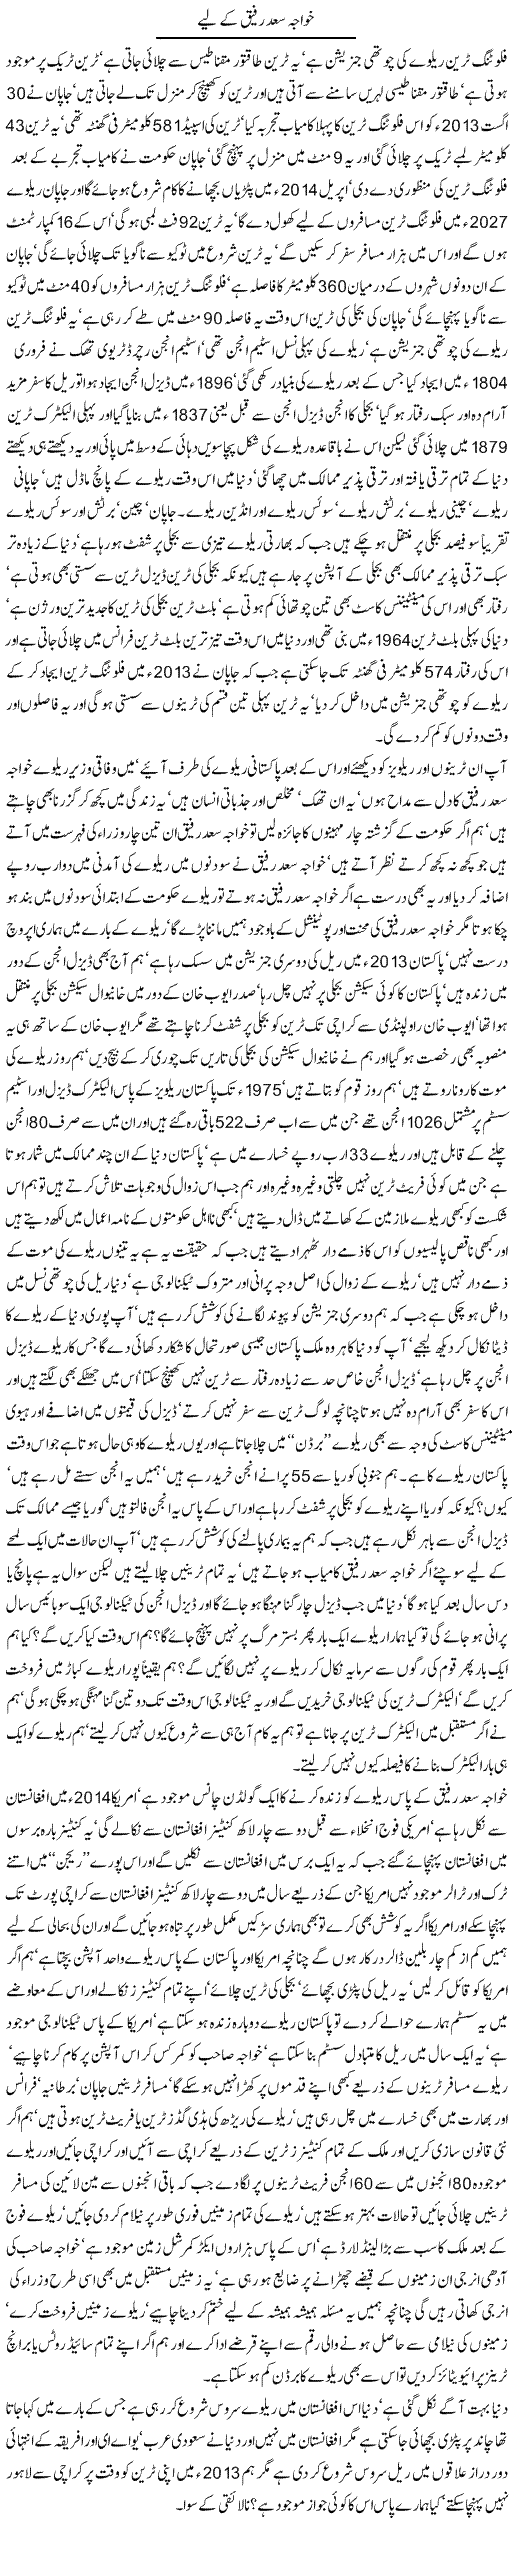 Pakistan Railway - Some Suggestions By Javed Chaudhry